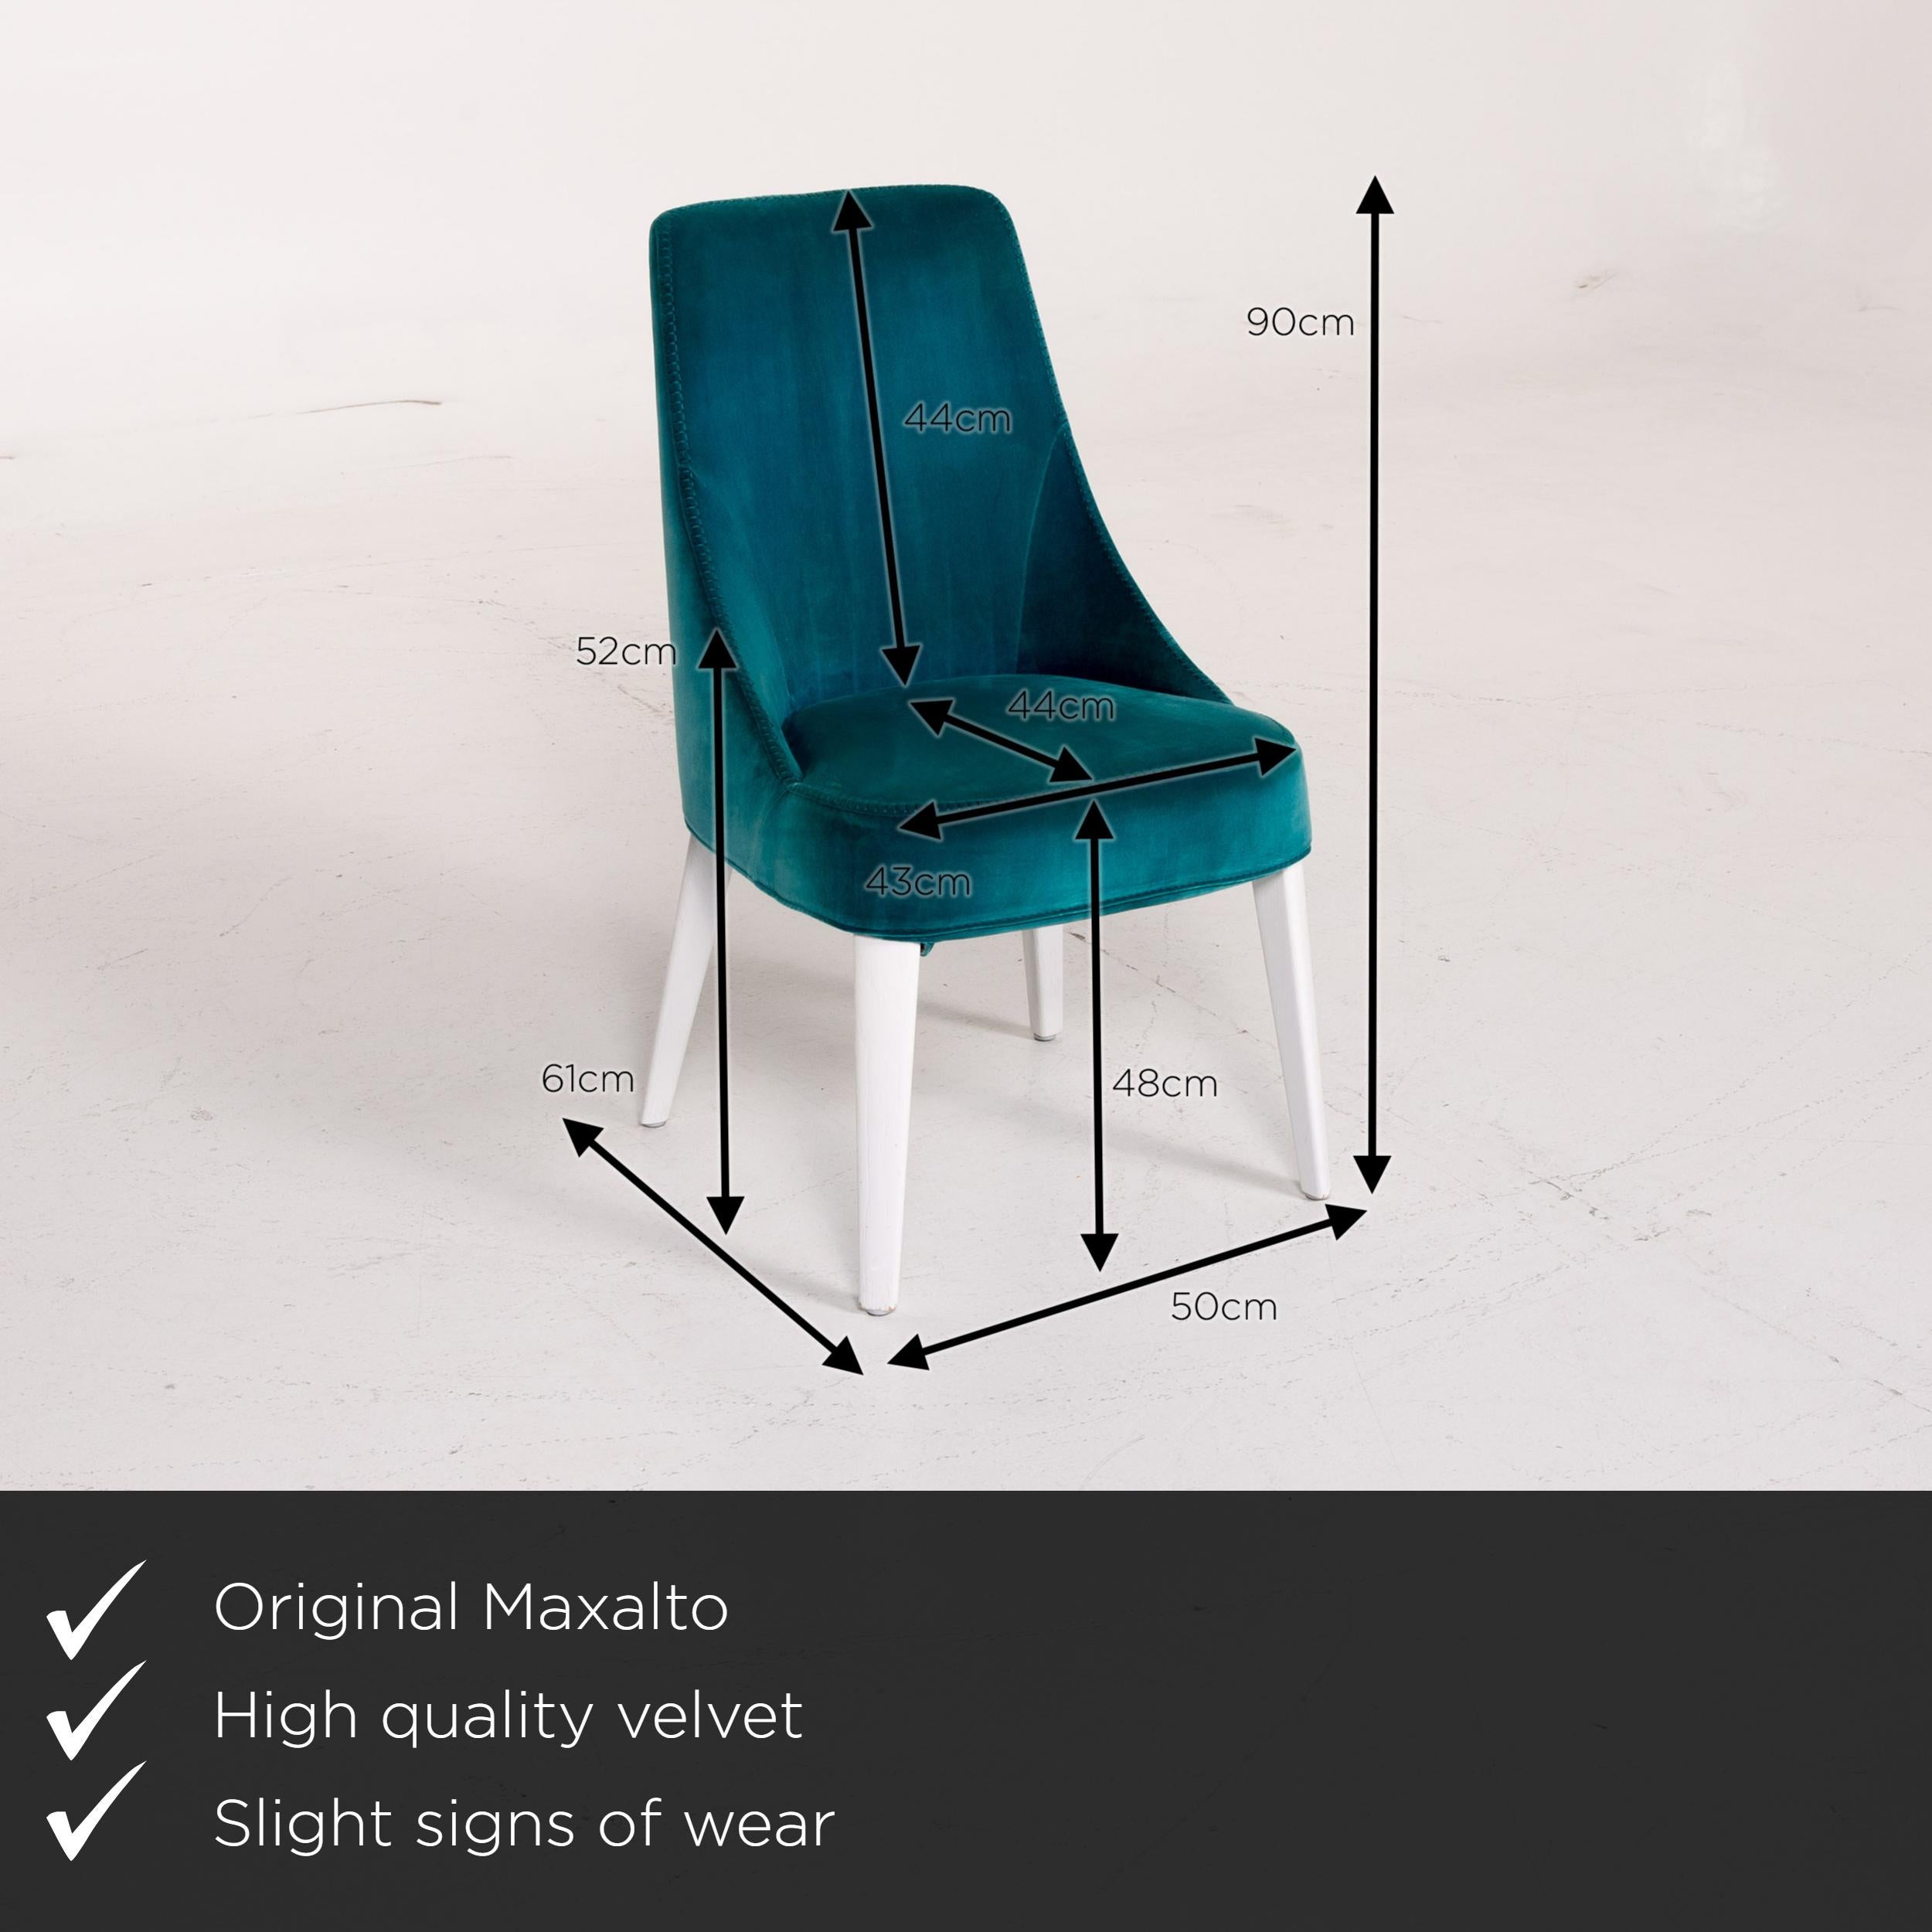 We present to you a Maxalto by B&B Italia velvet chair set turquoise.
 

 Product measurements in centimeters:
 

Depth: 61
Width: 50
Height: 90
Seat height: 48
Rest height: 52
Seat depth: 44
Seat width: 43
Back height: 44.
 